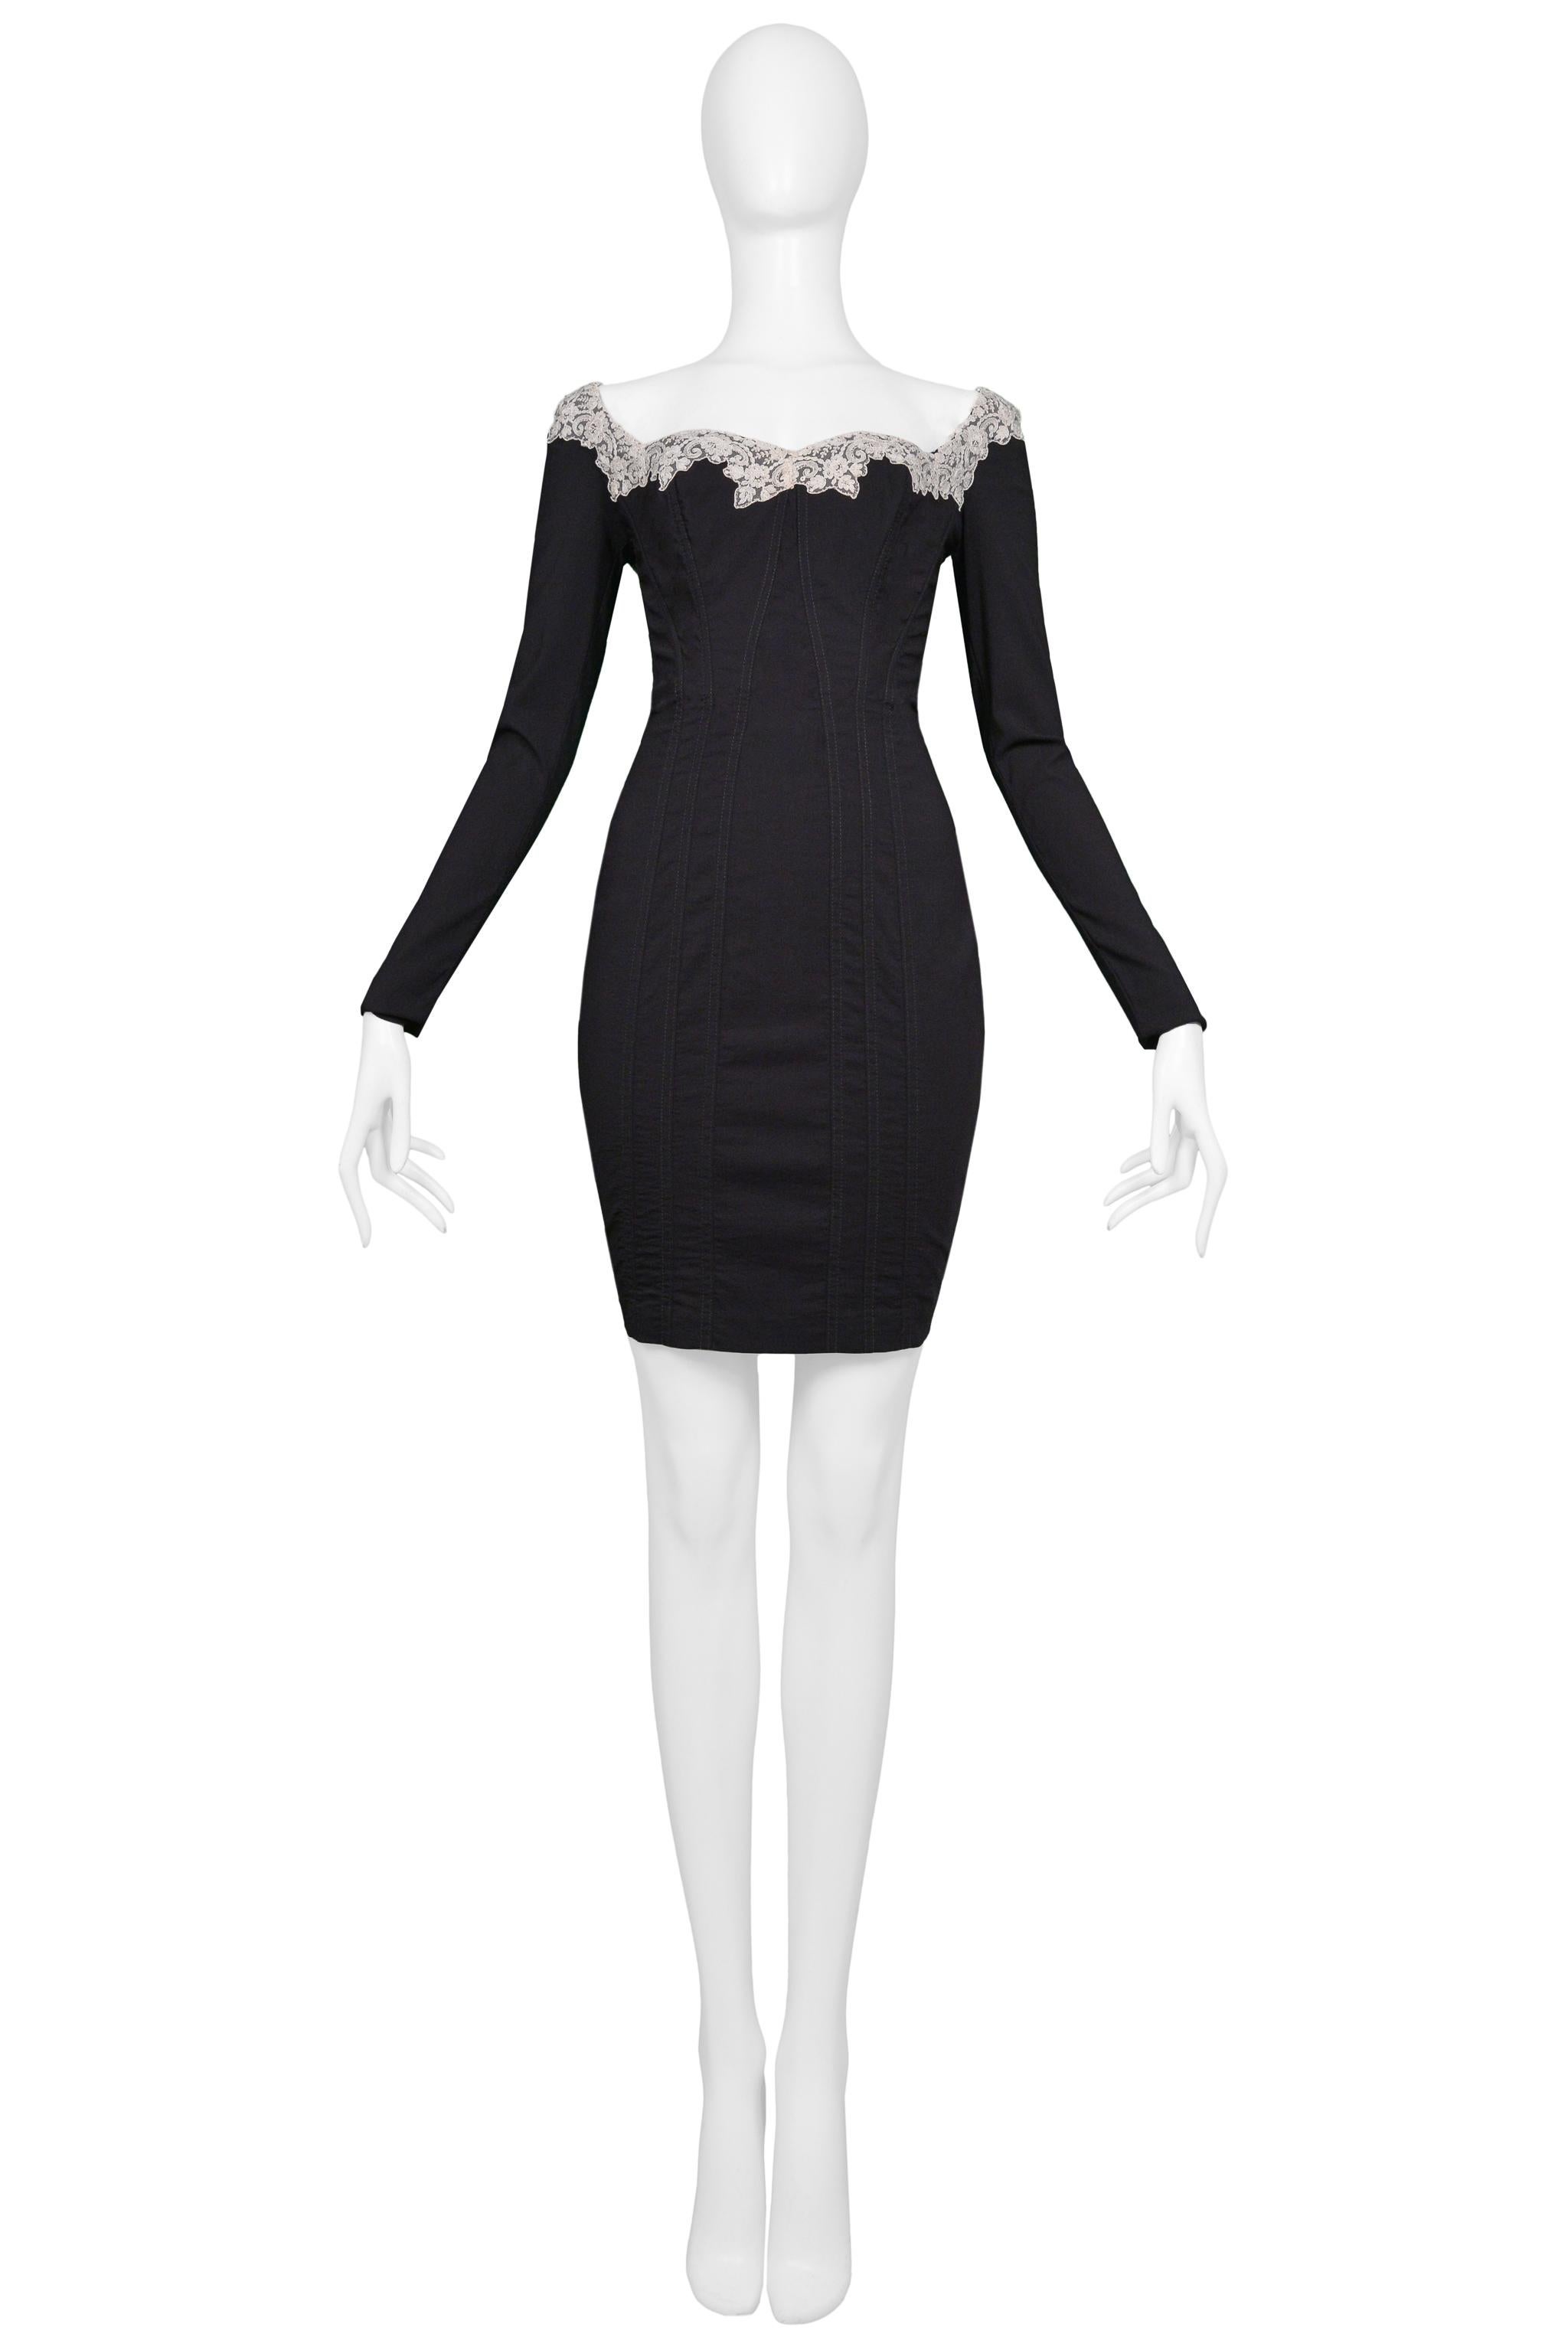 Resurrection Vintage is excited to offer a vintage Chantal Thomass black corset dress with stretch featuring lace collar, fitted body, long sleeves, and center back zipper. 

Chantal Thomass
Size 38
75% Wool, 20% Polyamide, 5% Lycra
1995 Collection